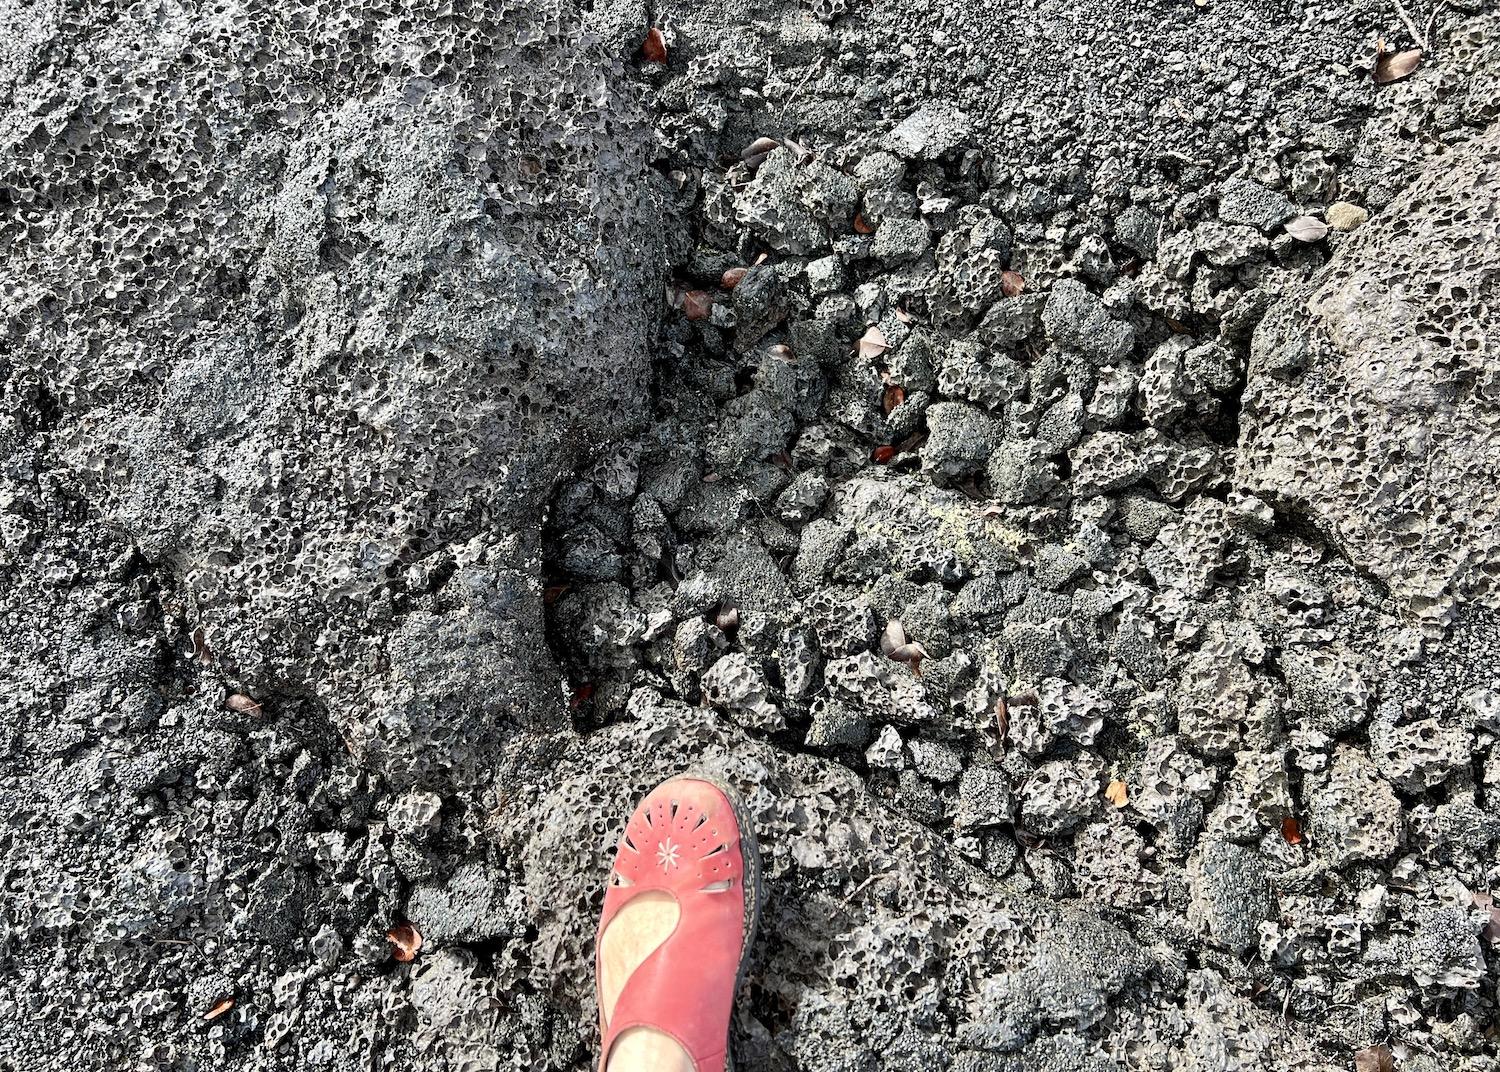 Beautiful but treacherous solidified lava on the caldera floor during a short hike.